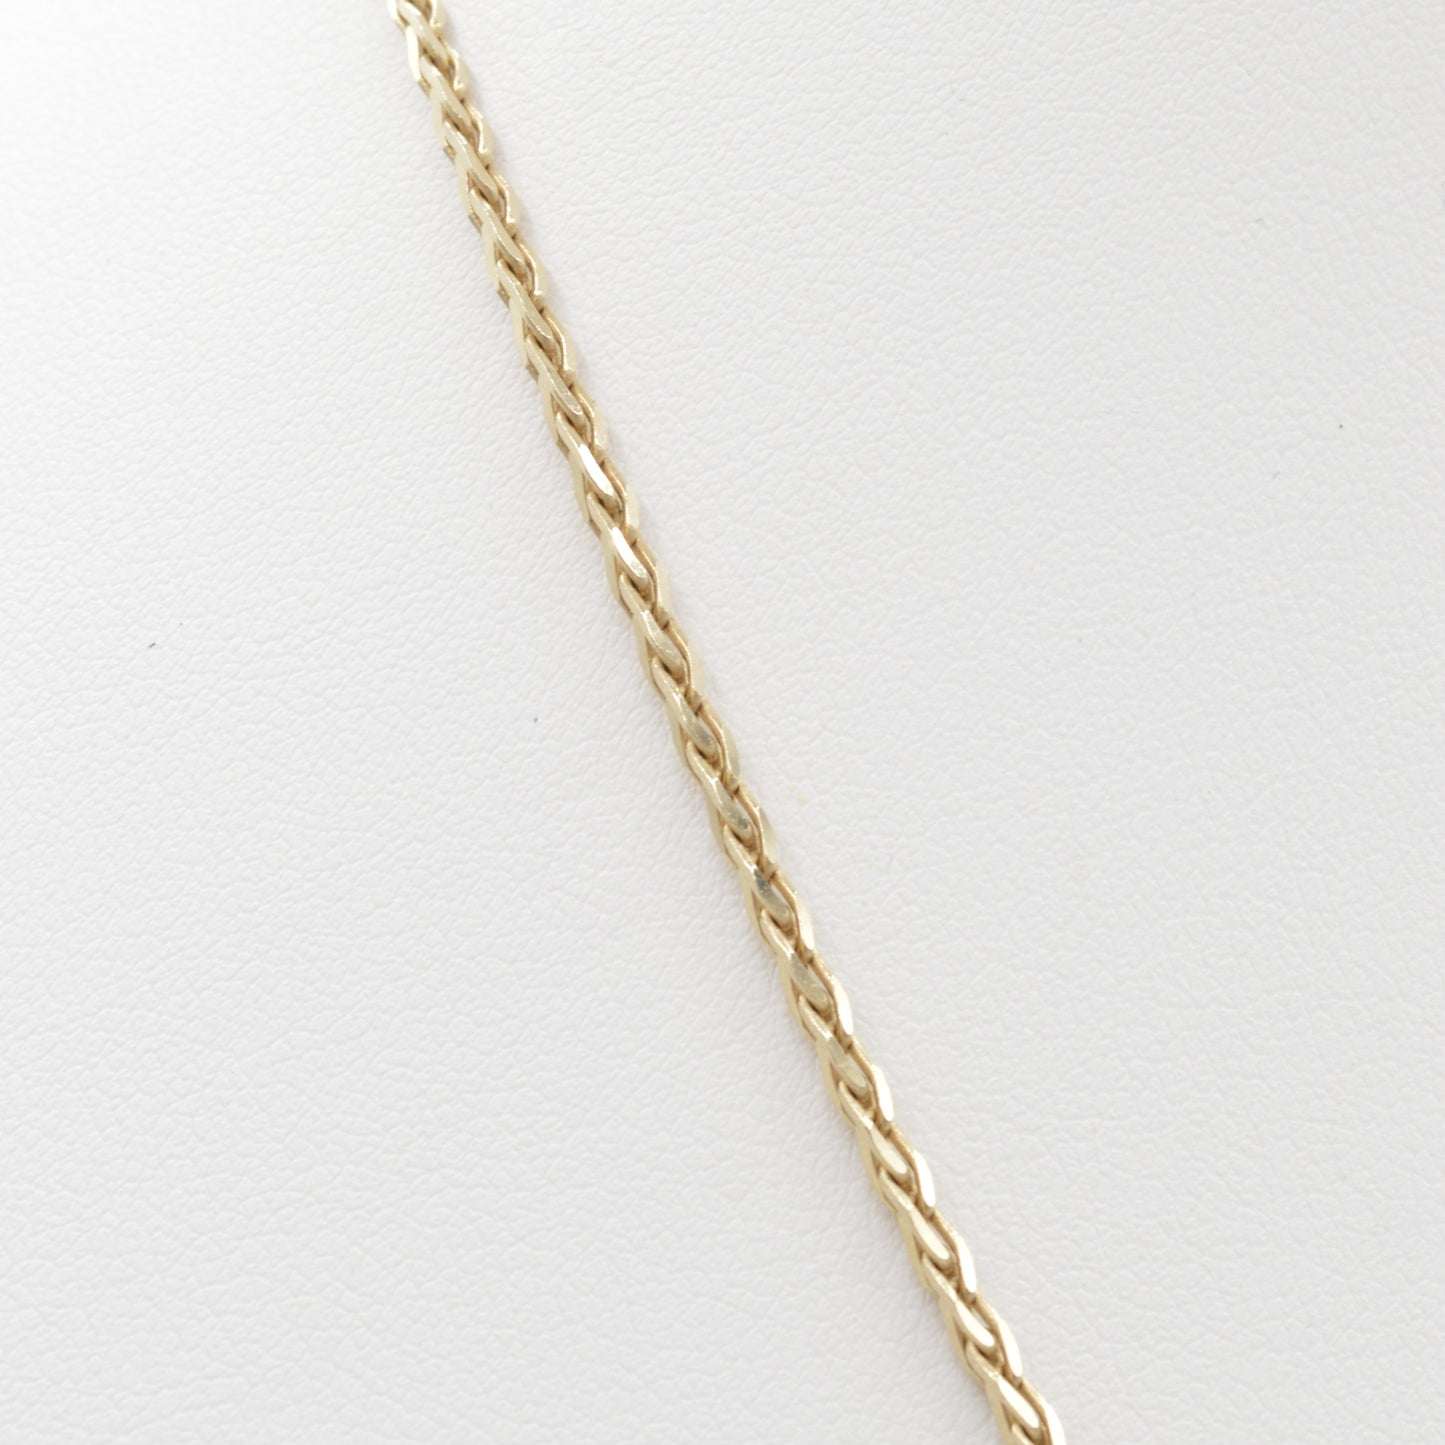 Square Foxtail Chain